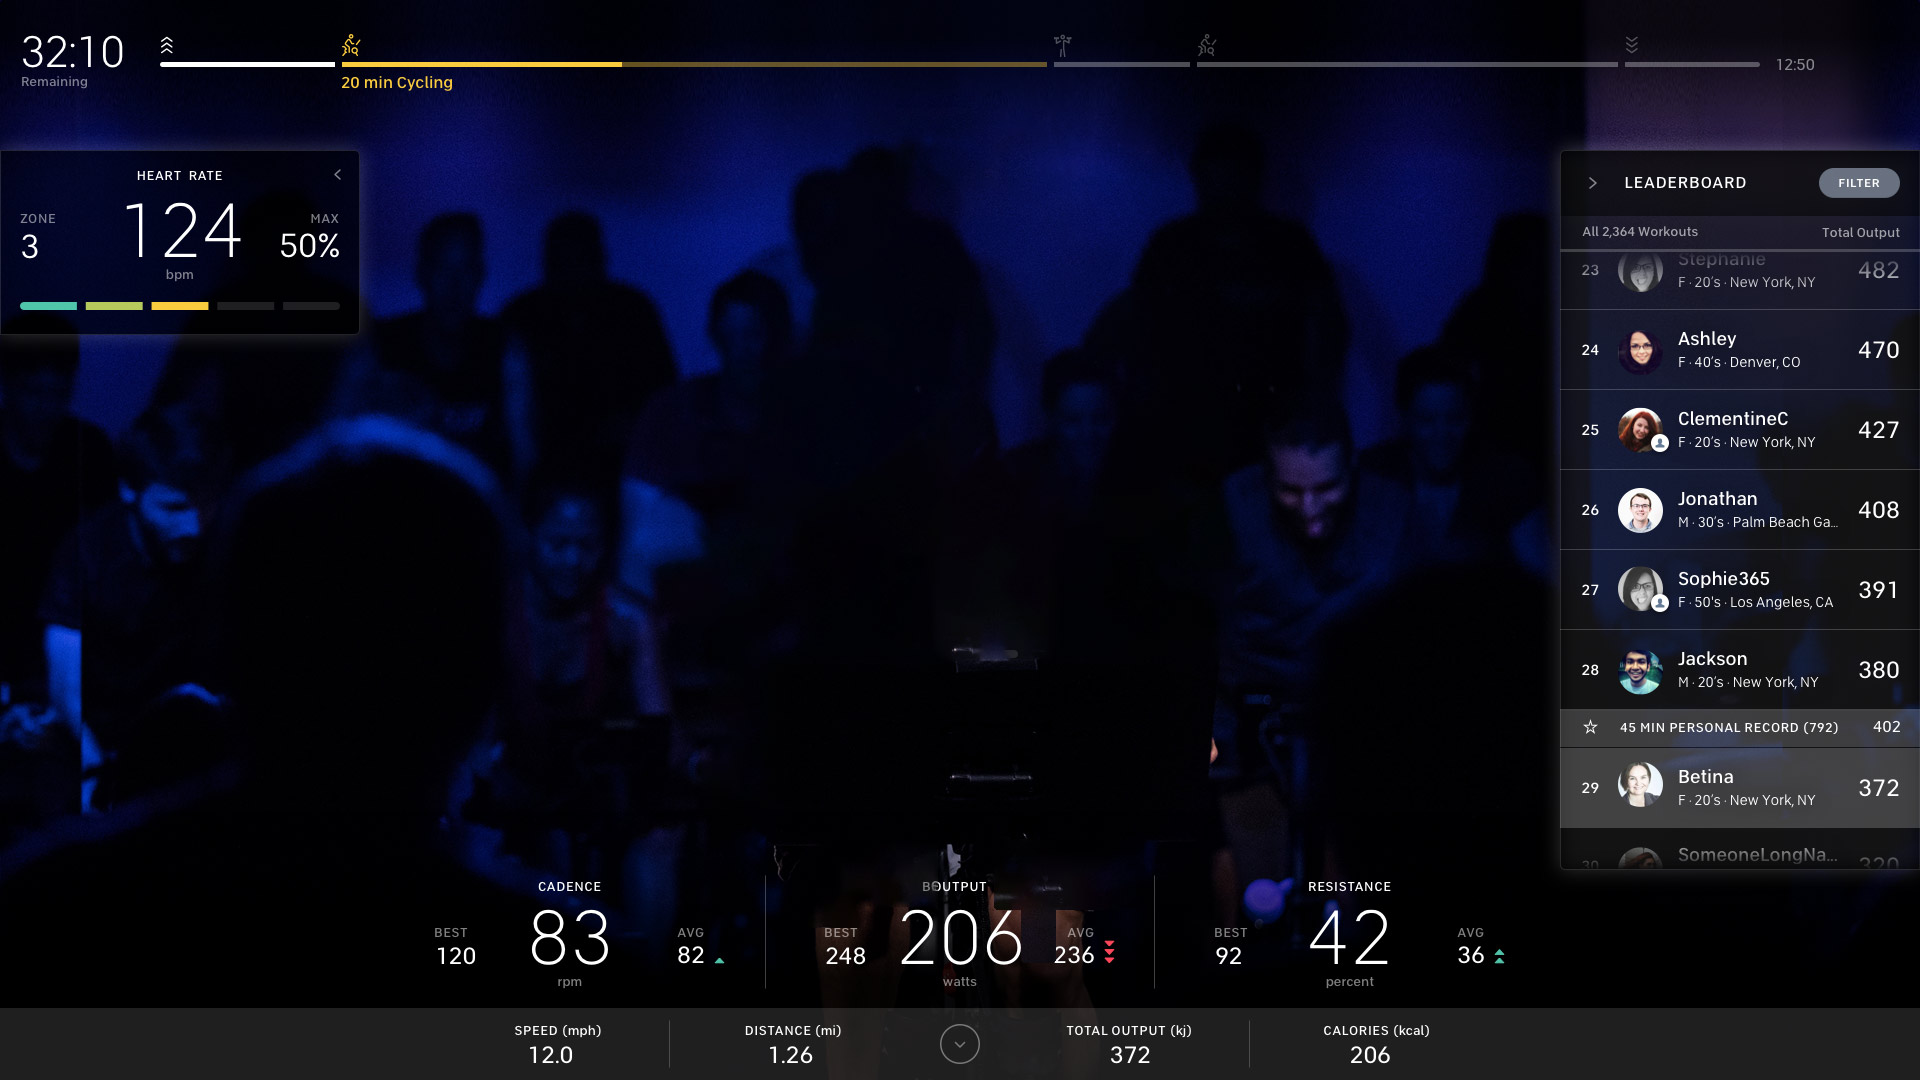 Zoom background for Peloton